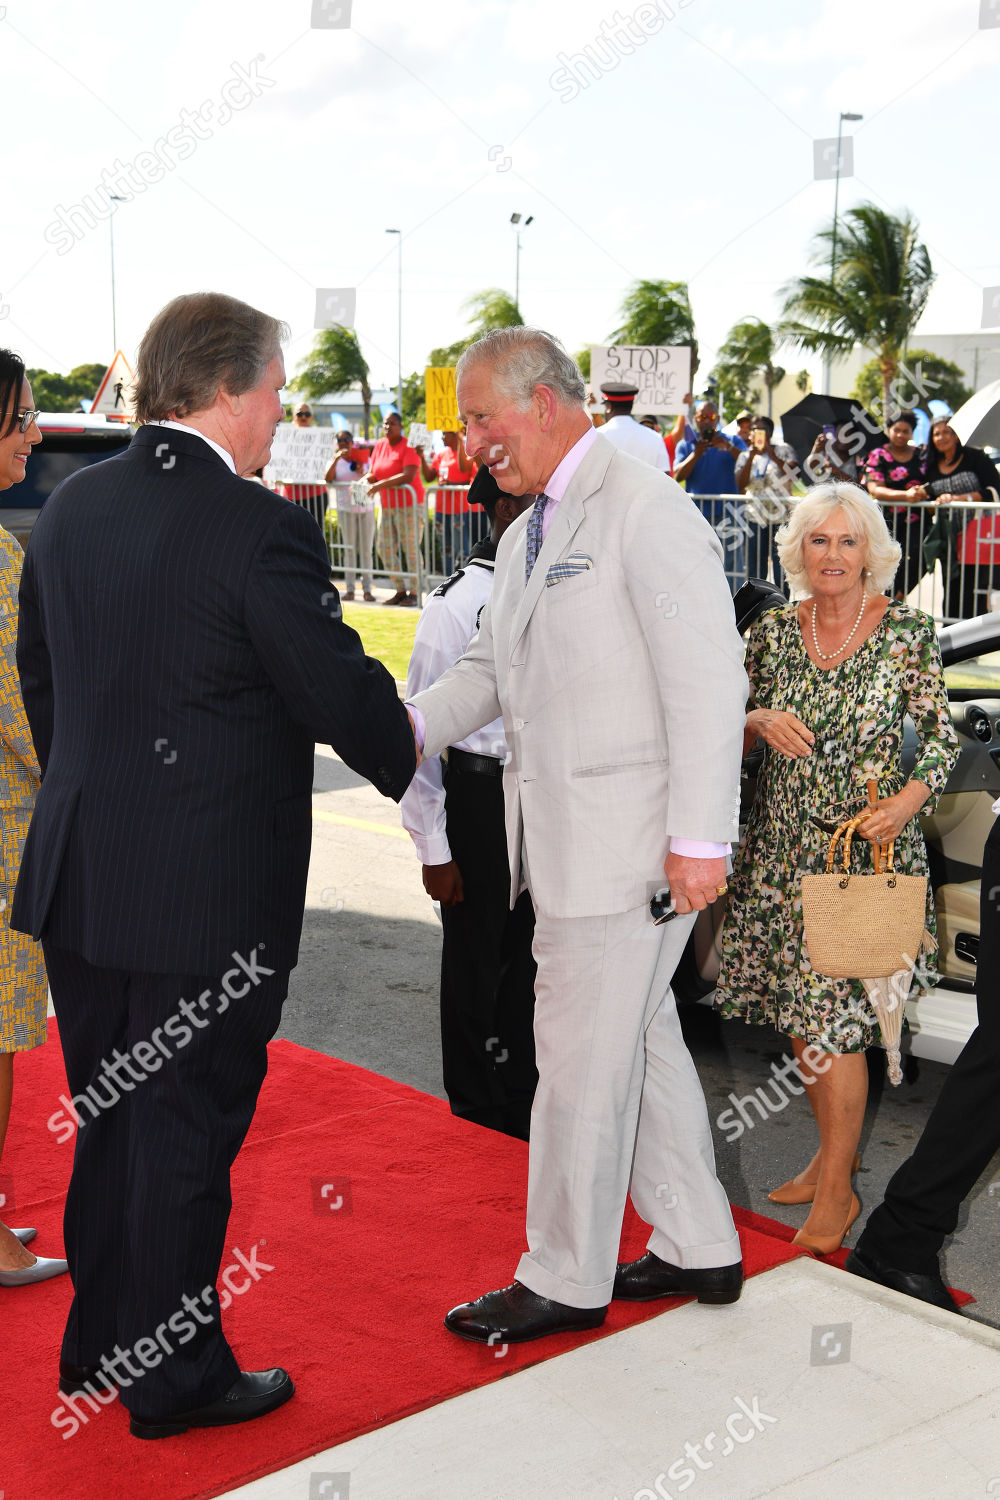 prince-charles-and-camilla-duchess-of-cornwall-caribbean-tour-cayman-islands-shutterstock-editorial-10180229a.jpg